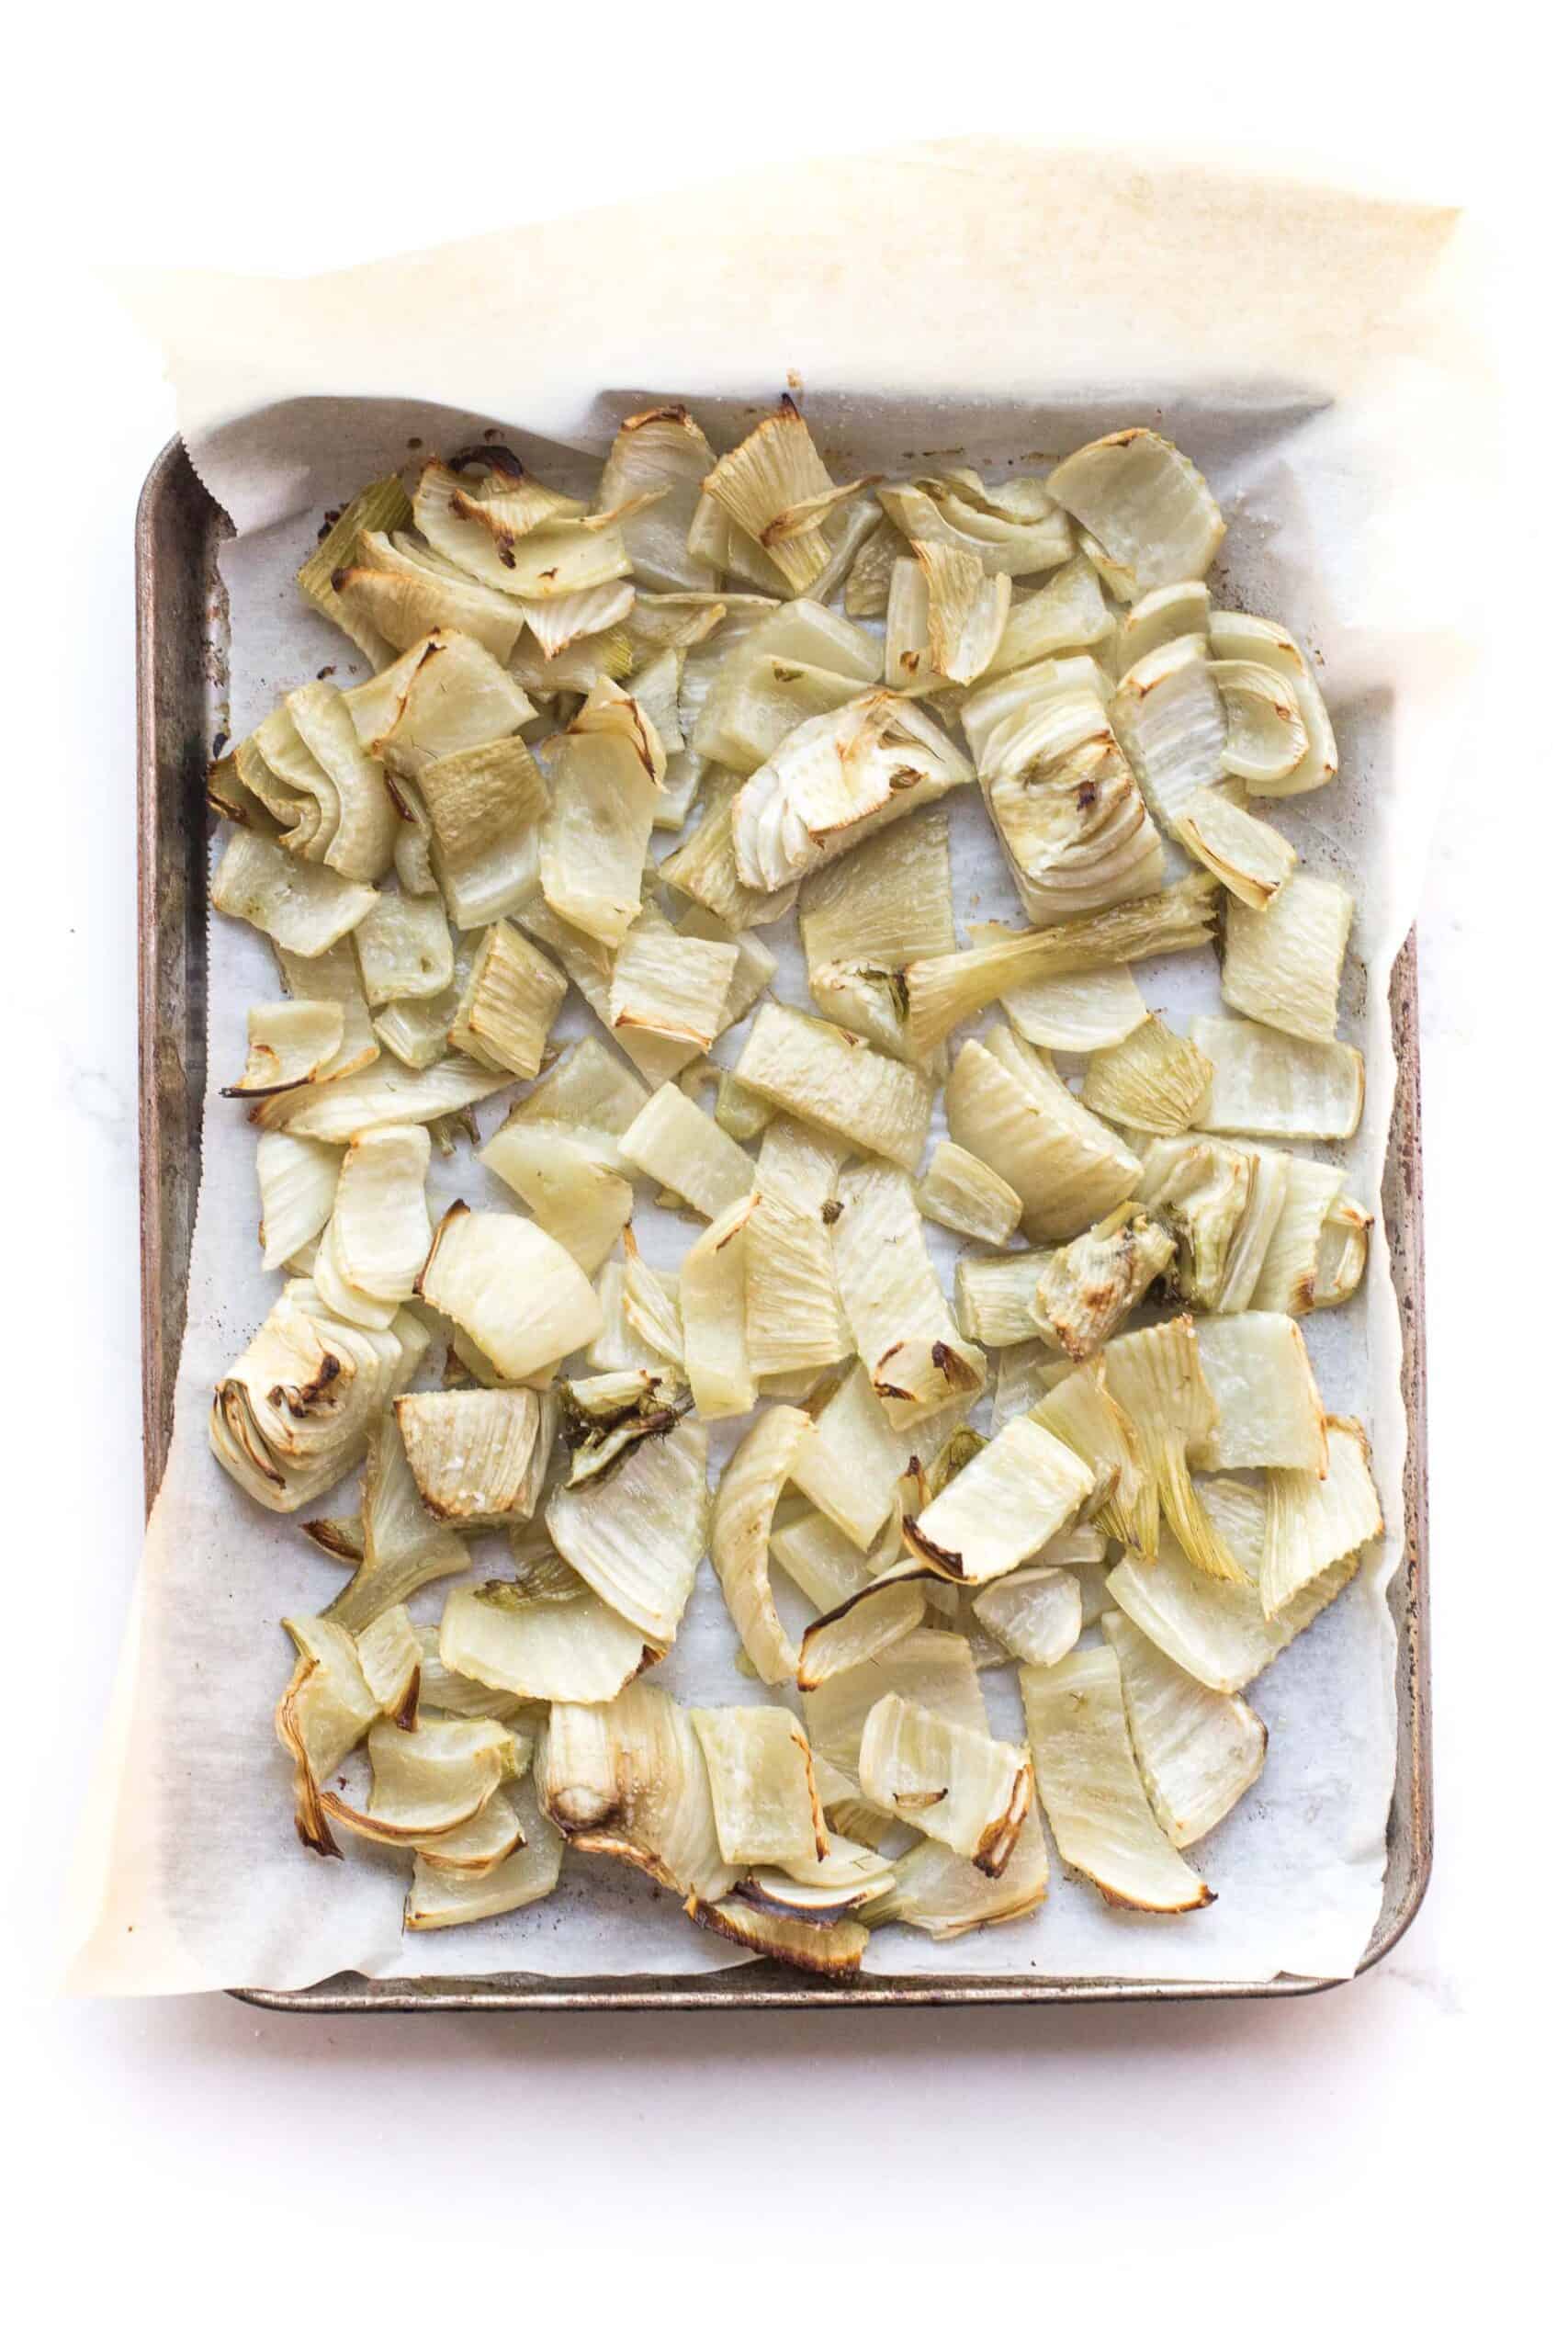 ROASTED FENNEL ON A SHEET PAN